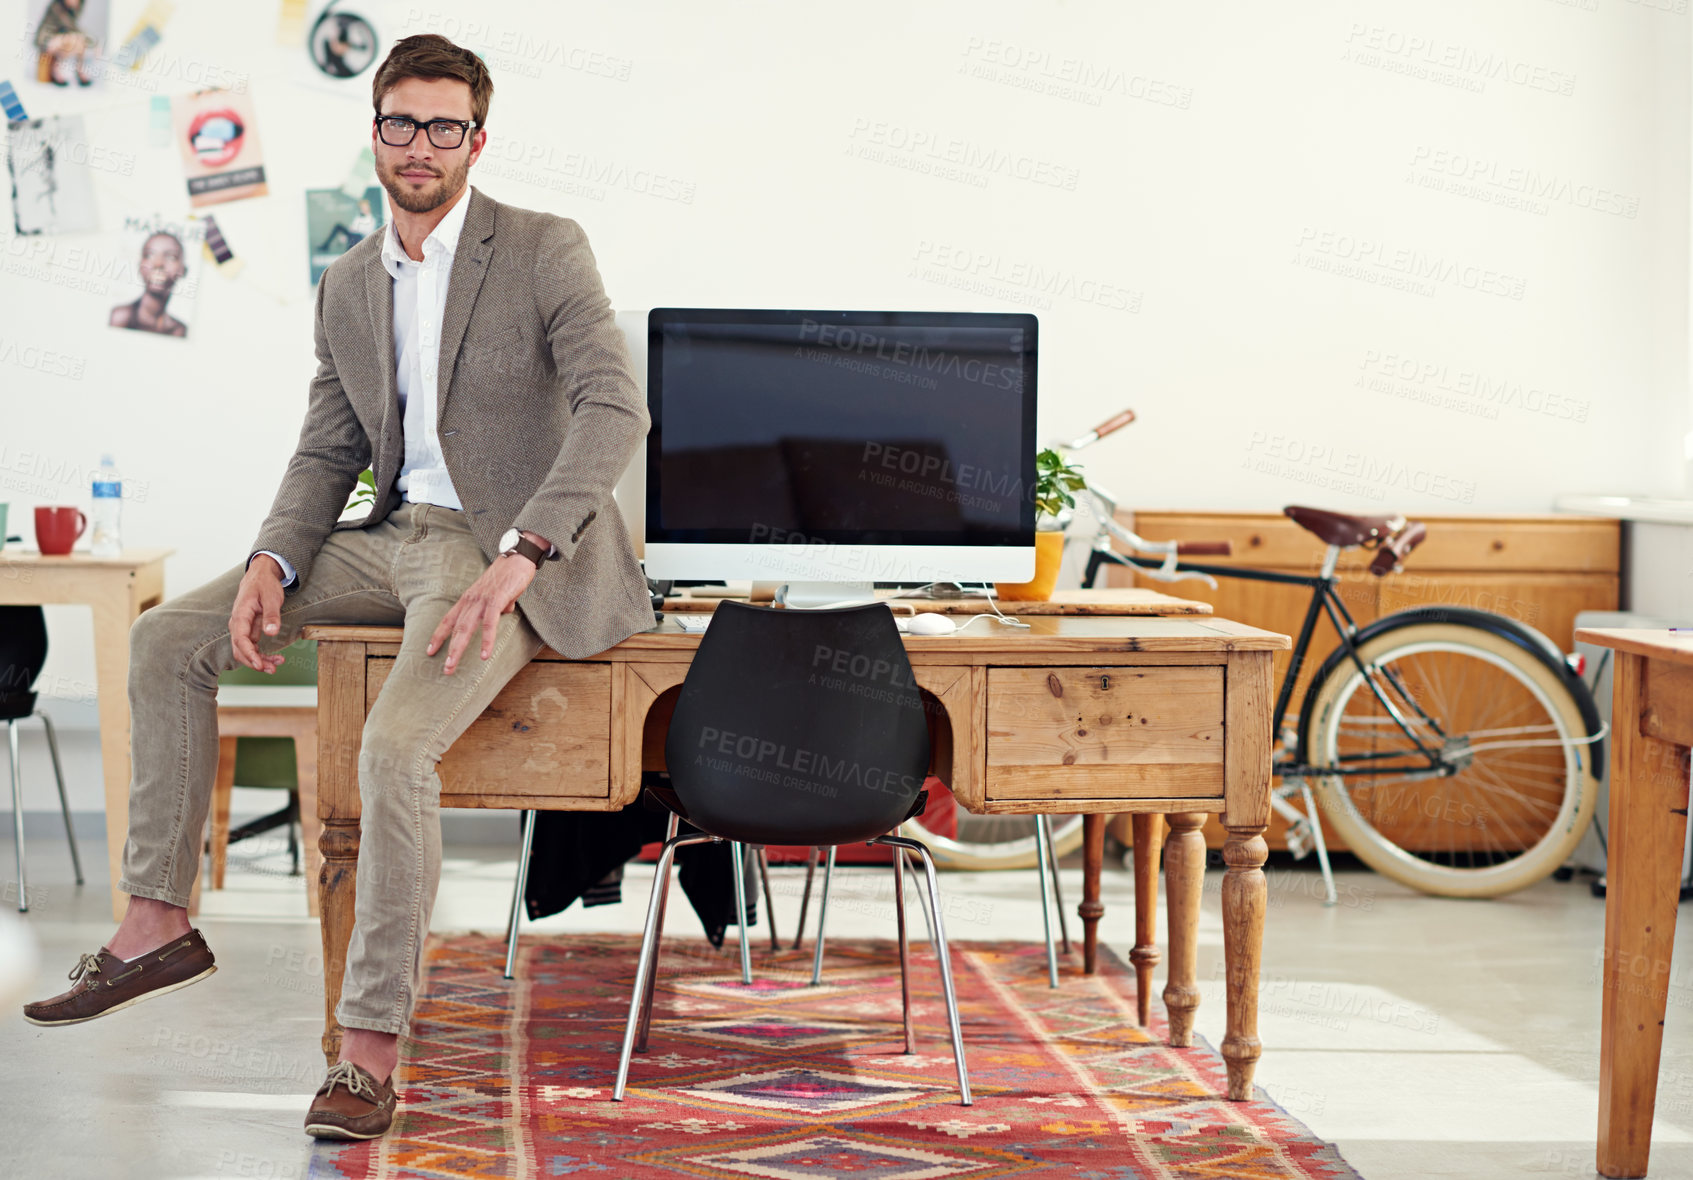 Buy stock photo Portrait of a casually-dressed young man sitting on his desk in an office